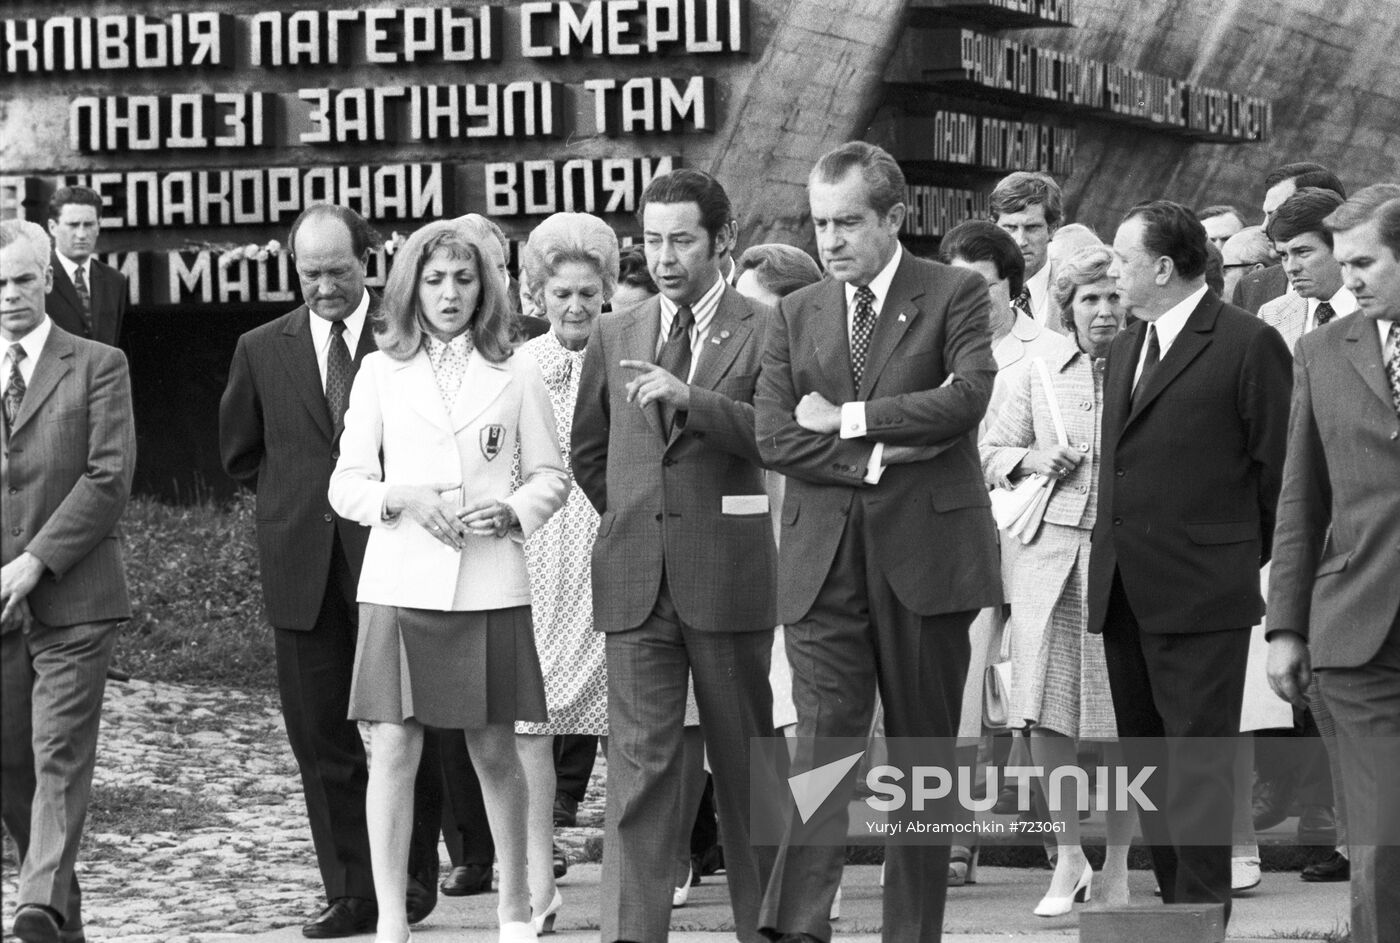 U.S. president Richard Nixon on the official visit to the USSR